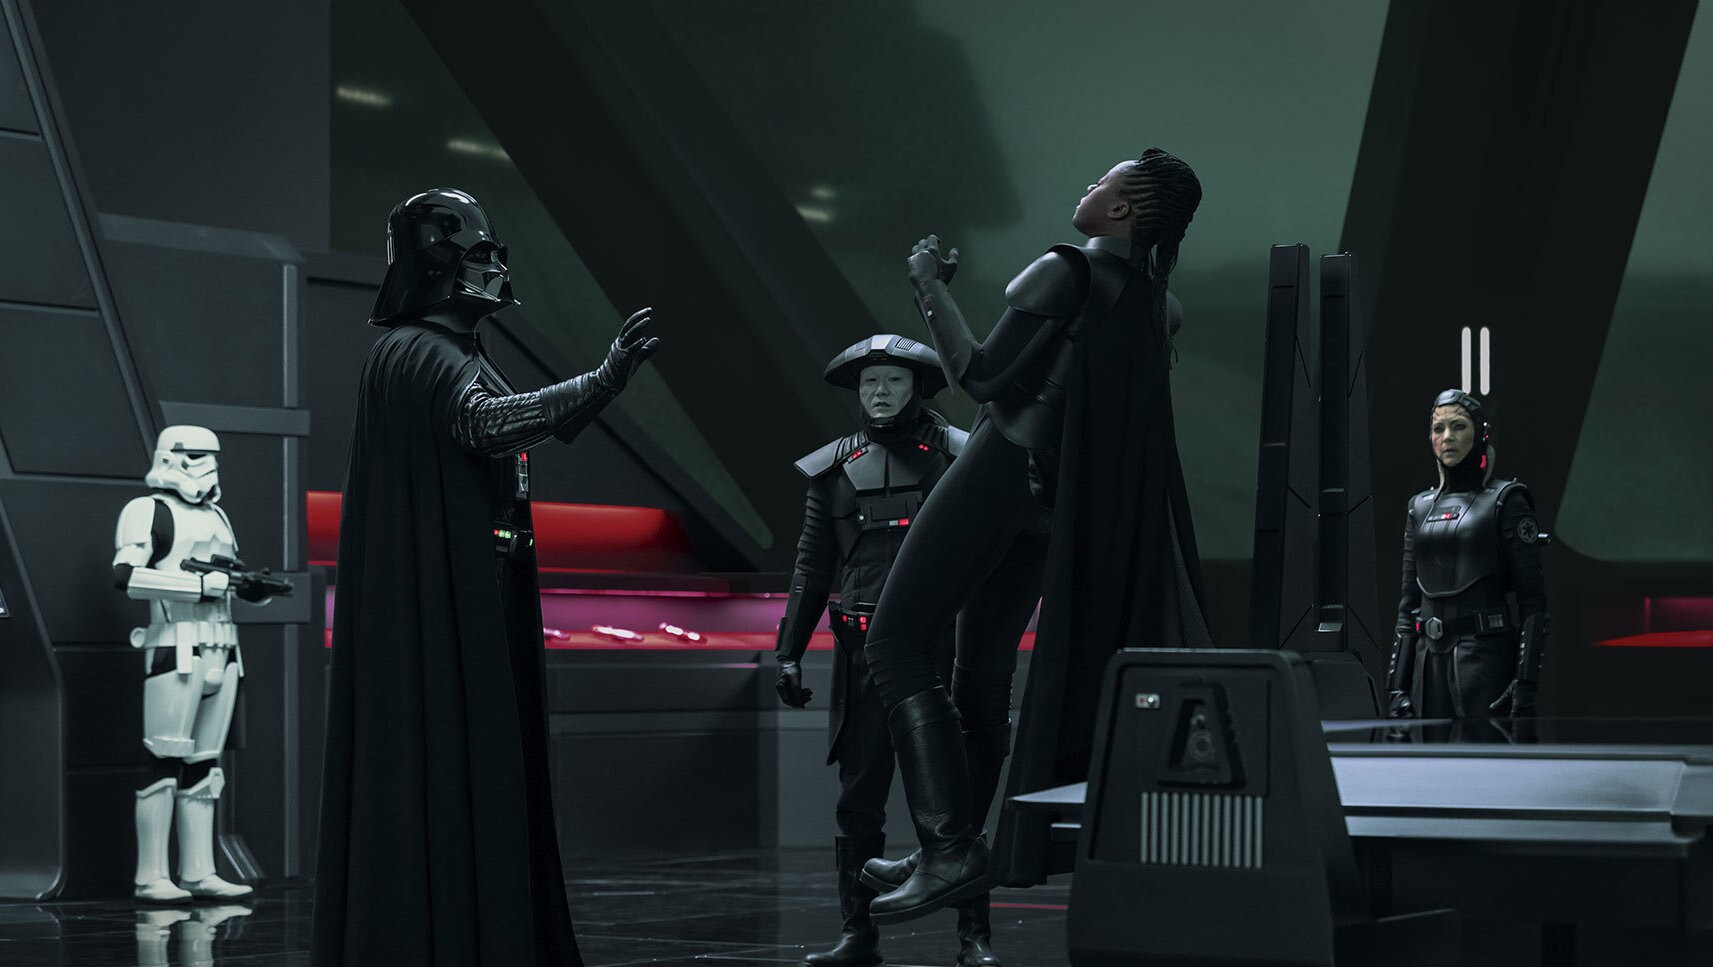 An angry Vader comes to address Reva's failure. The Inquisitor informs her master, however, that ...